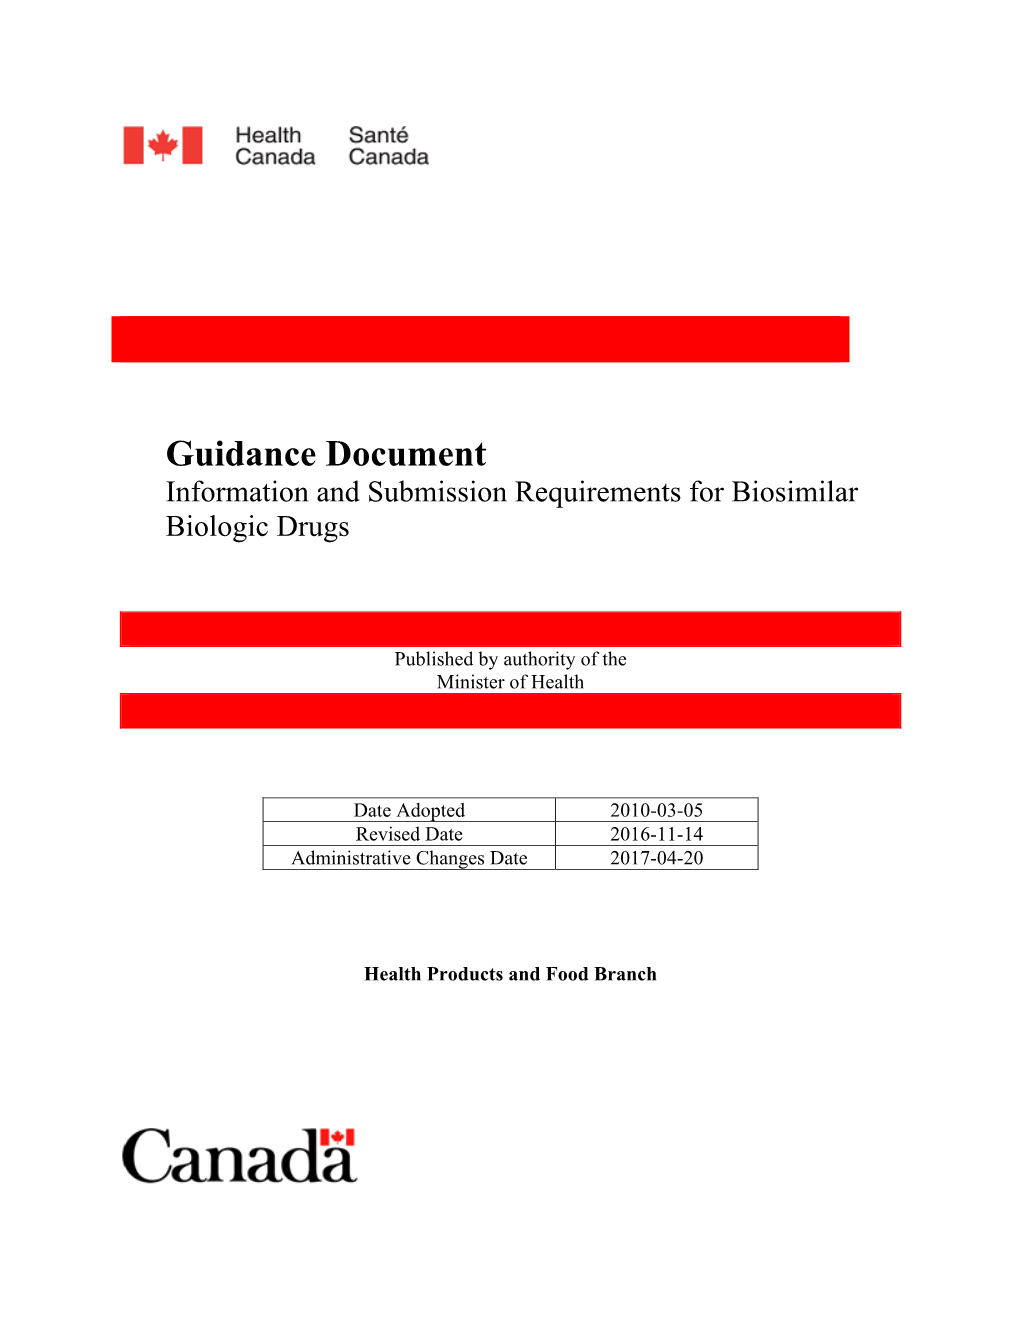 Guidance Document Information and Submission Requirements for Biosimilar Biologic Drugs